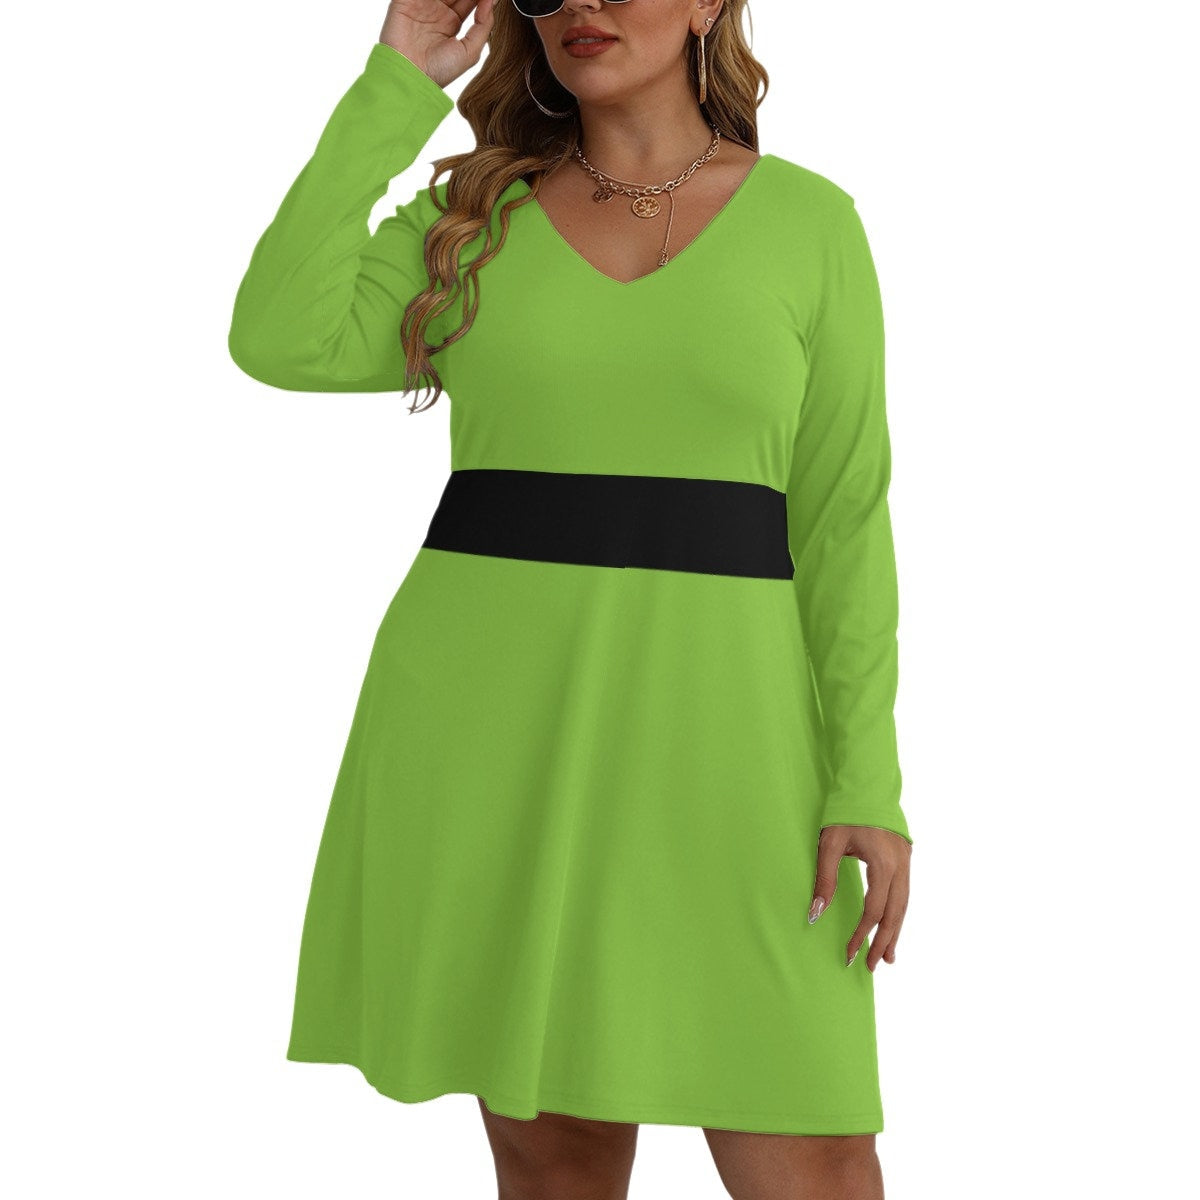 Buttercup PPG Anime Girls Plus Size Women's V-neck Long Sleeve Dress, 90s Cartoon, Sexy BBW, Gift for Her, Adult Halloween Costume, Cosplay